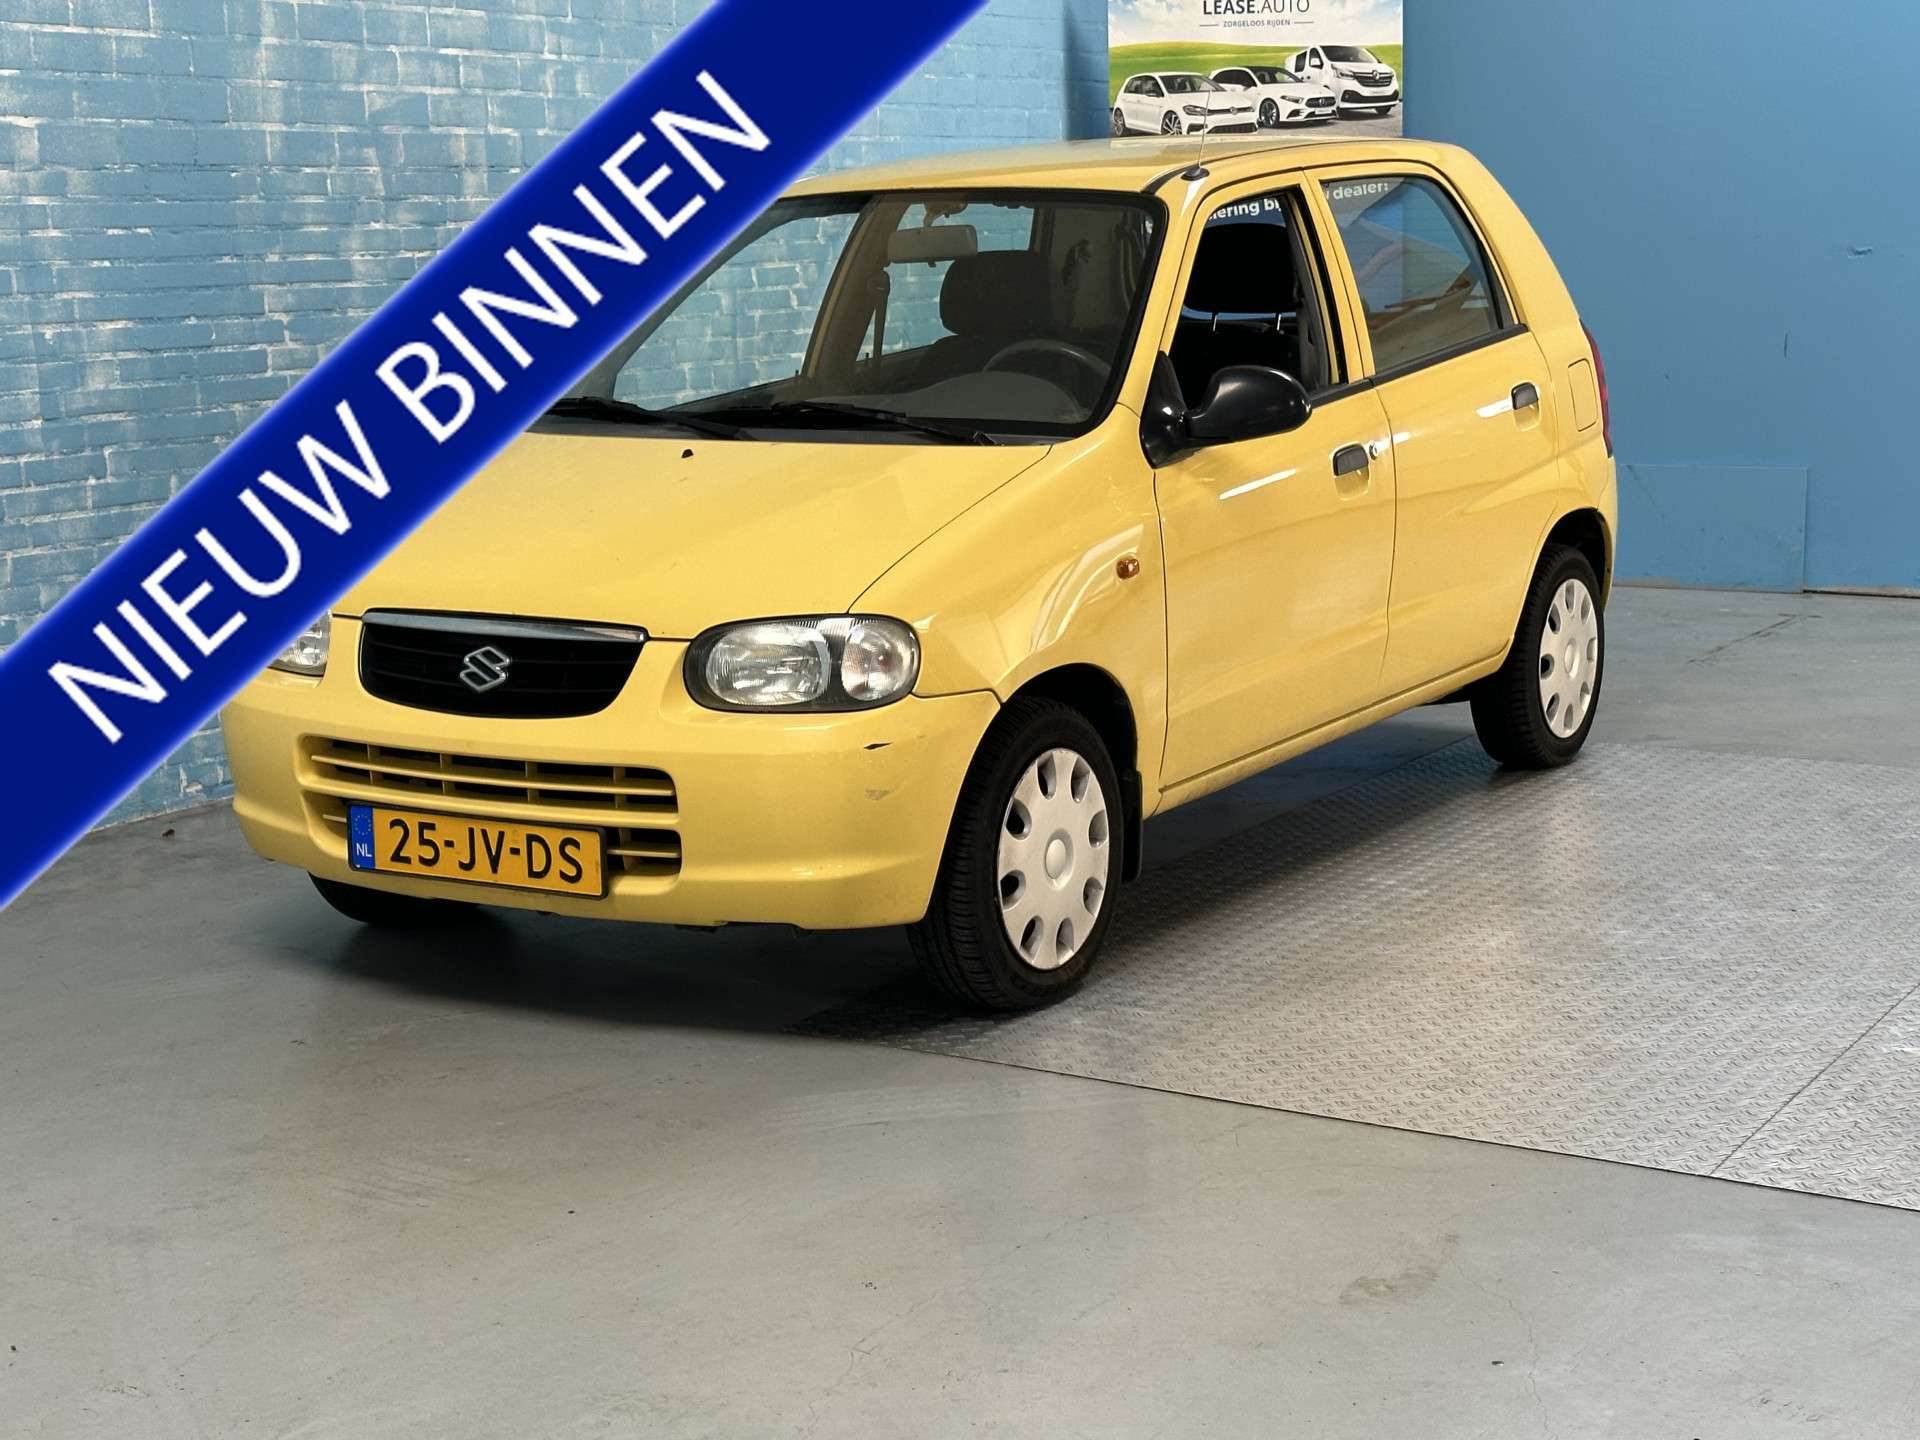 Suzuki Alto Compact in Yellow used in GEMERT for € 1,250.-